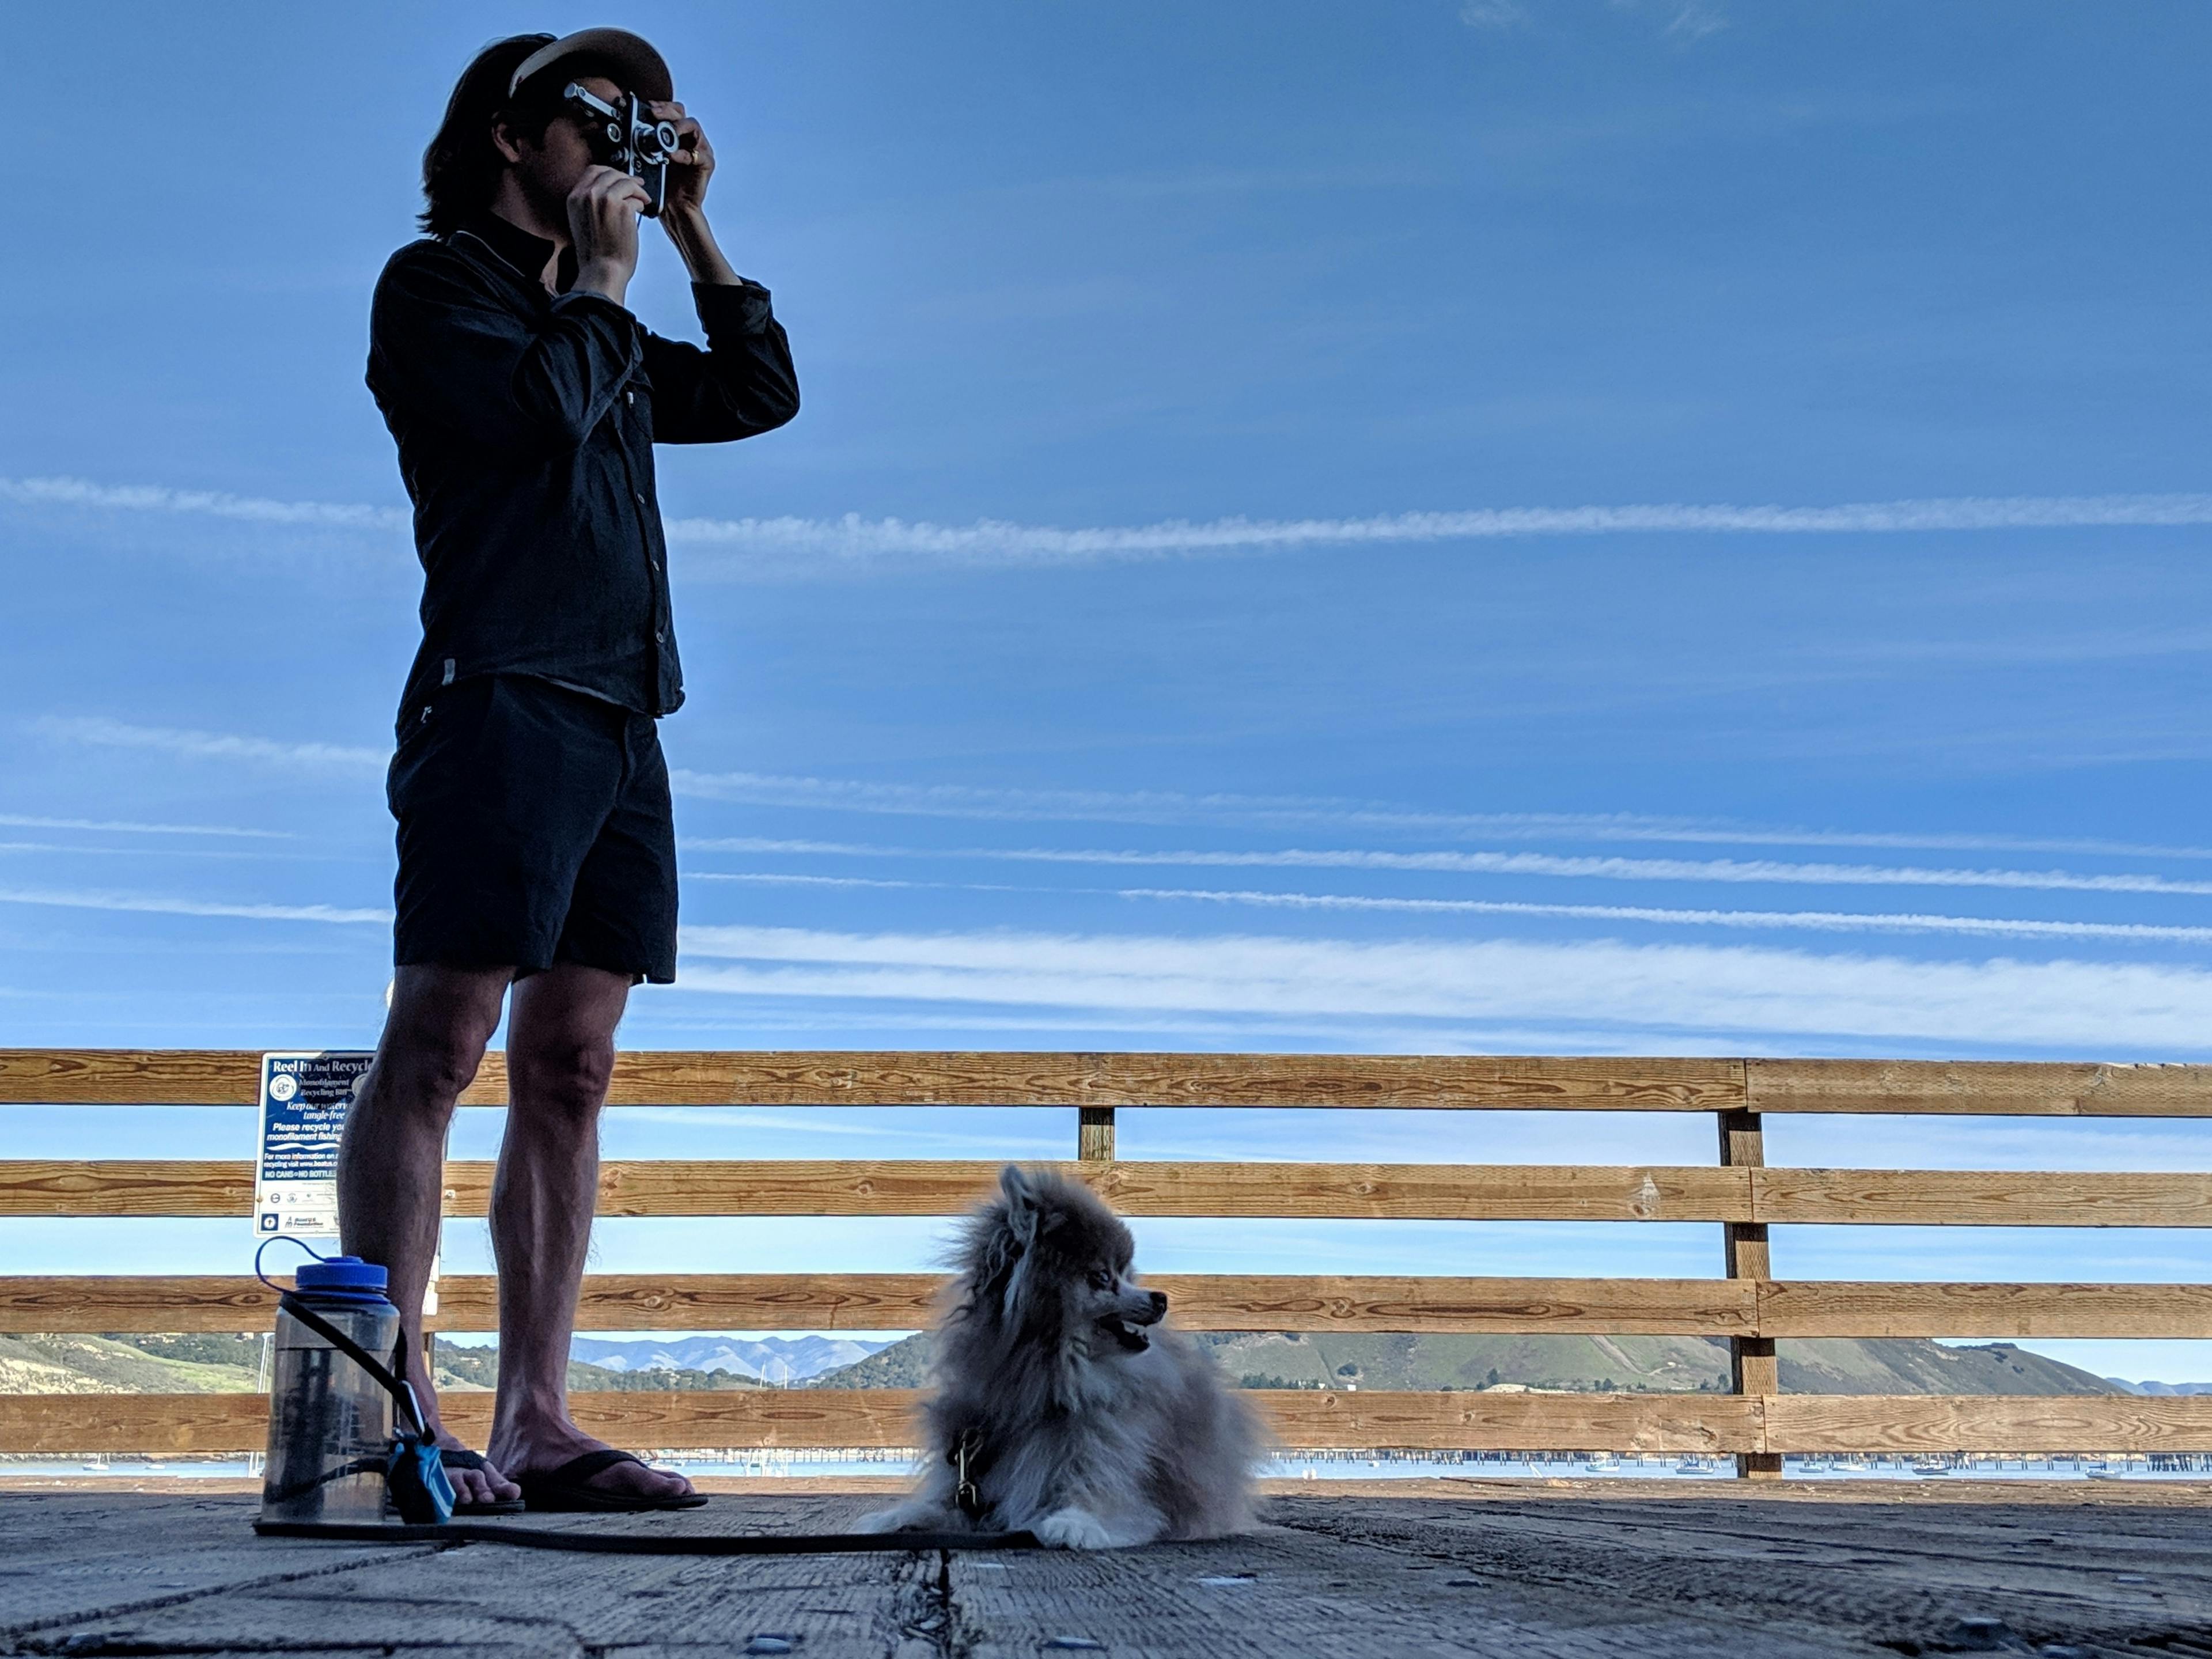 Coco and me at the beach near San Luis Obispo on January 19th, 2019